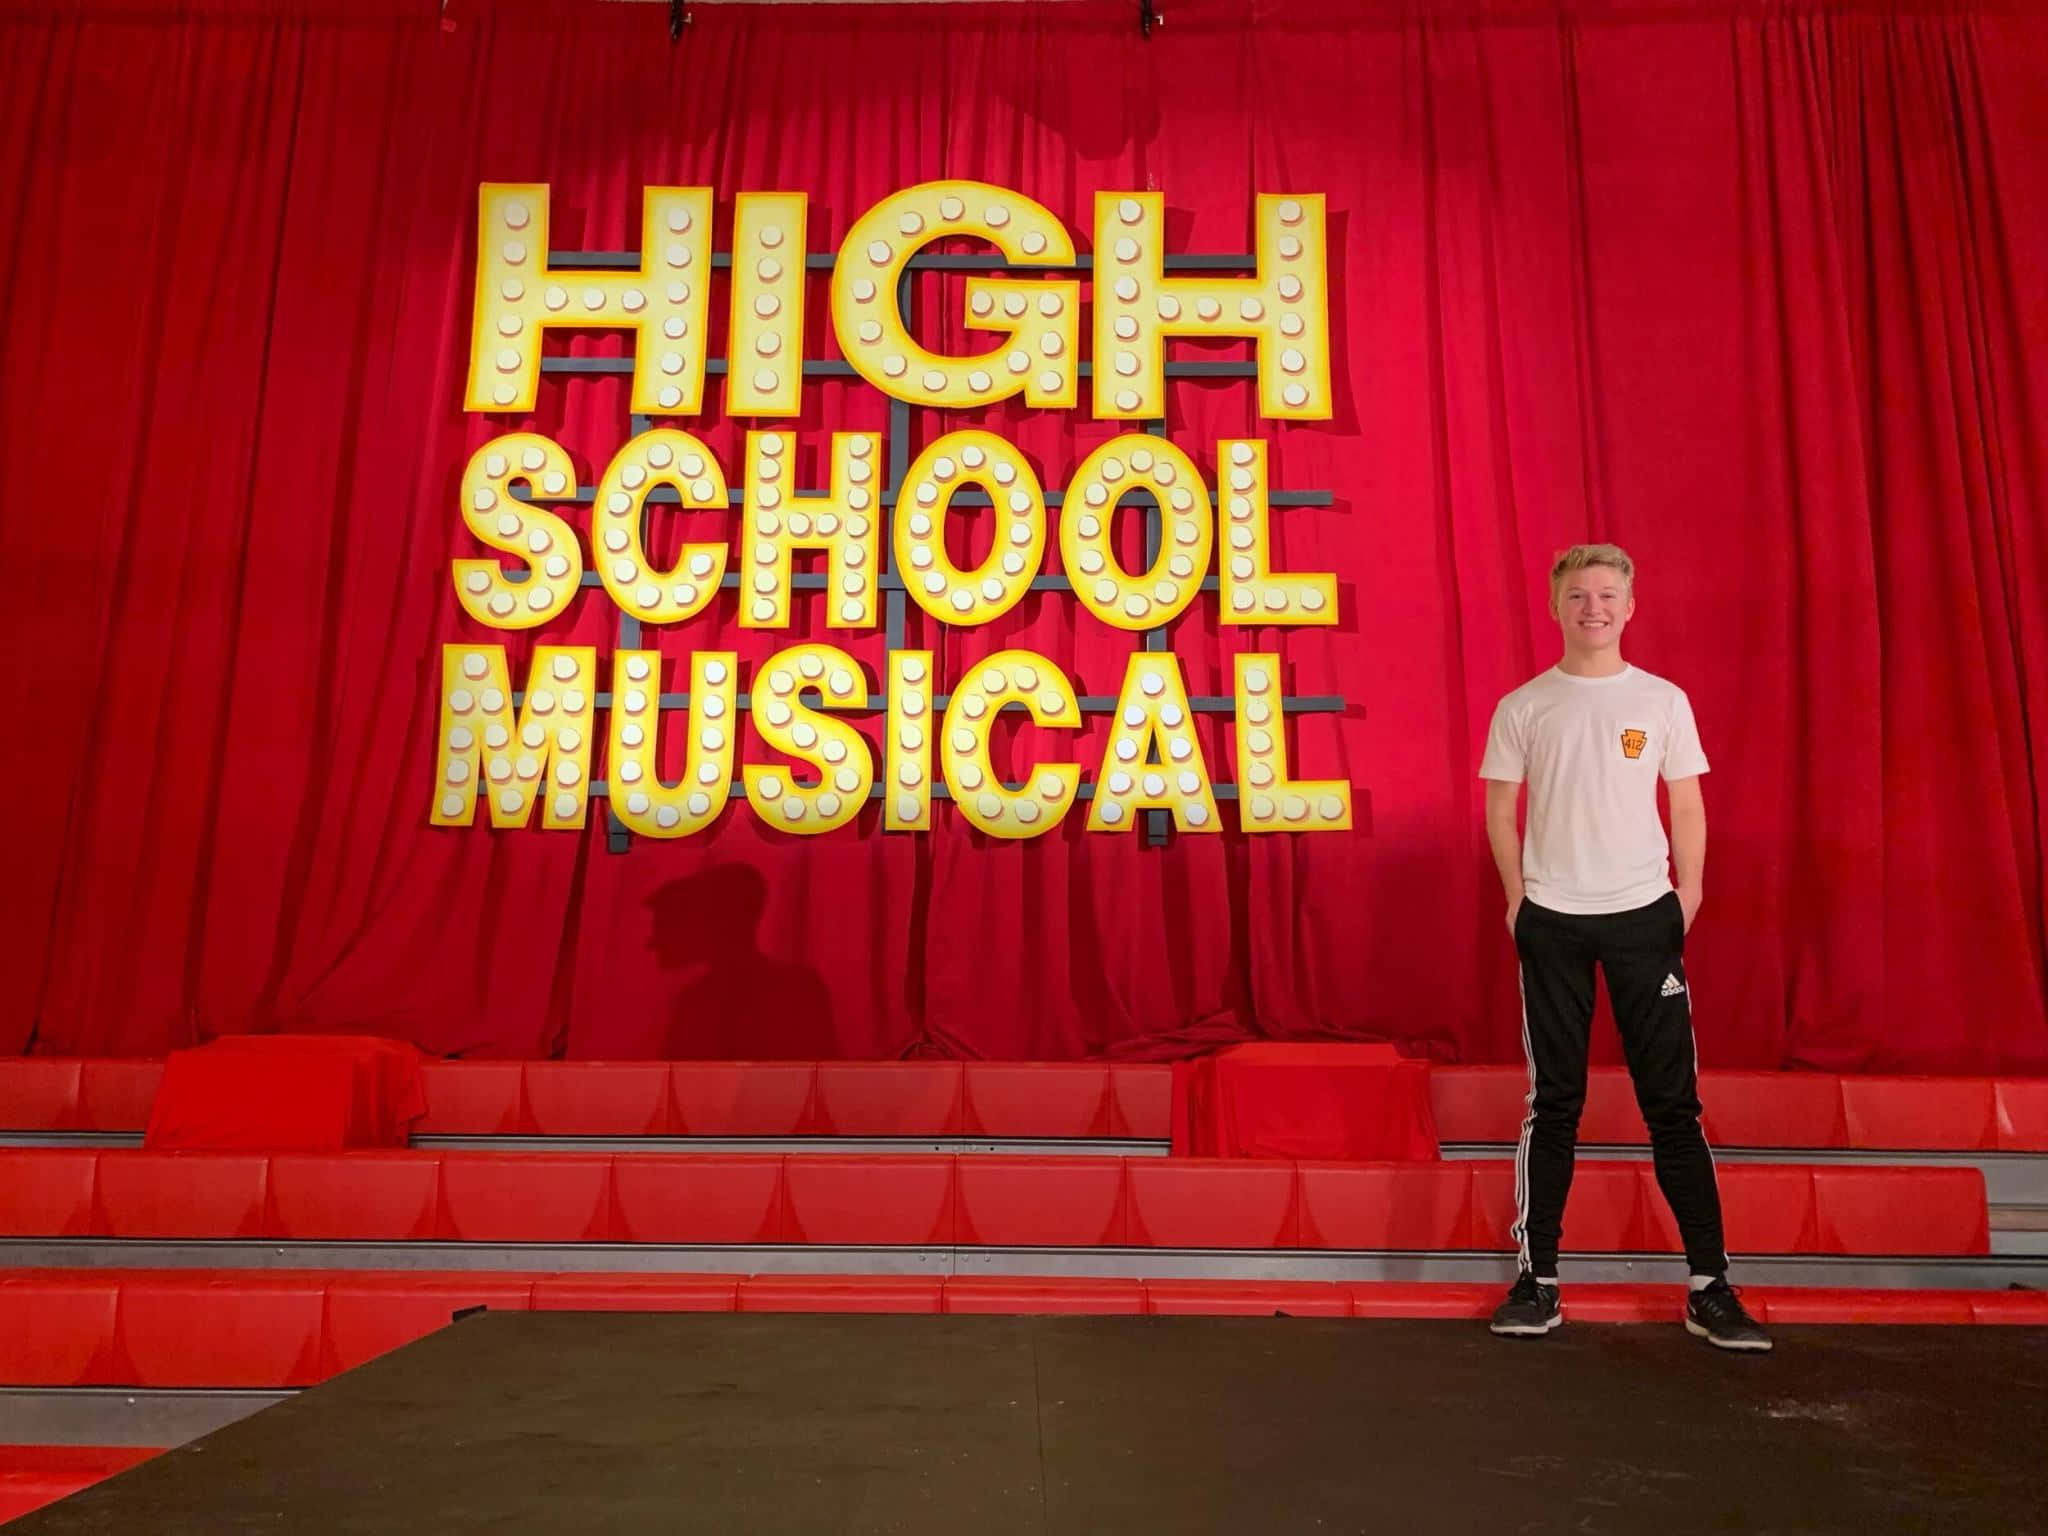 Caption: The High School Musical cast dancing and singing in a memorable scene